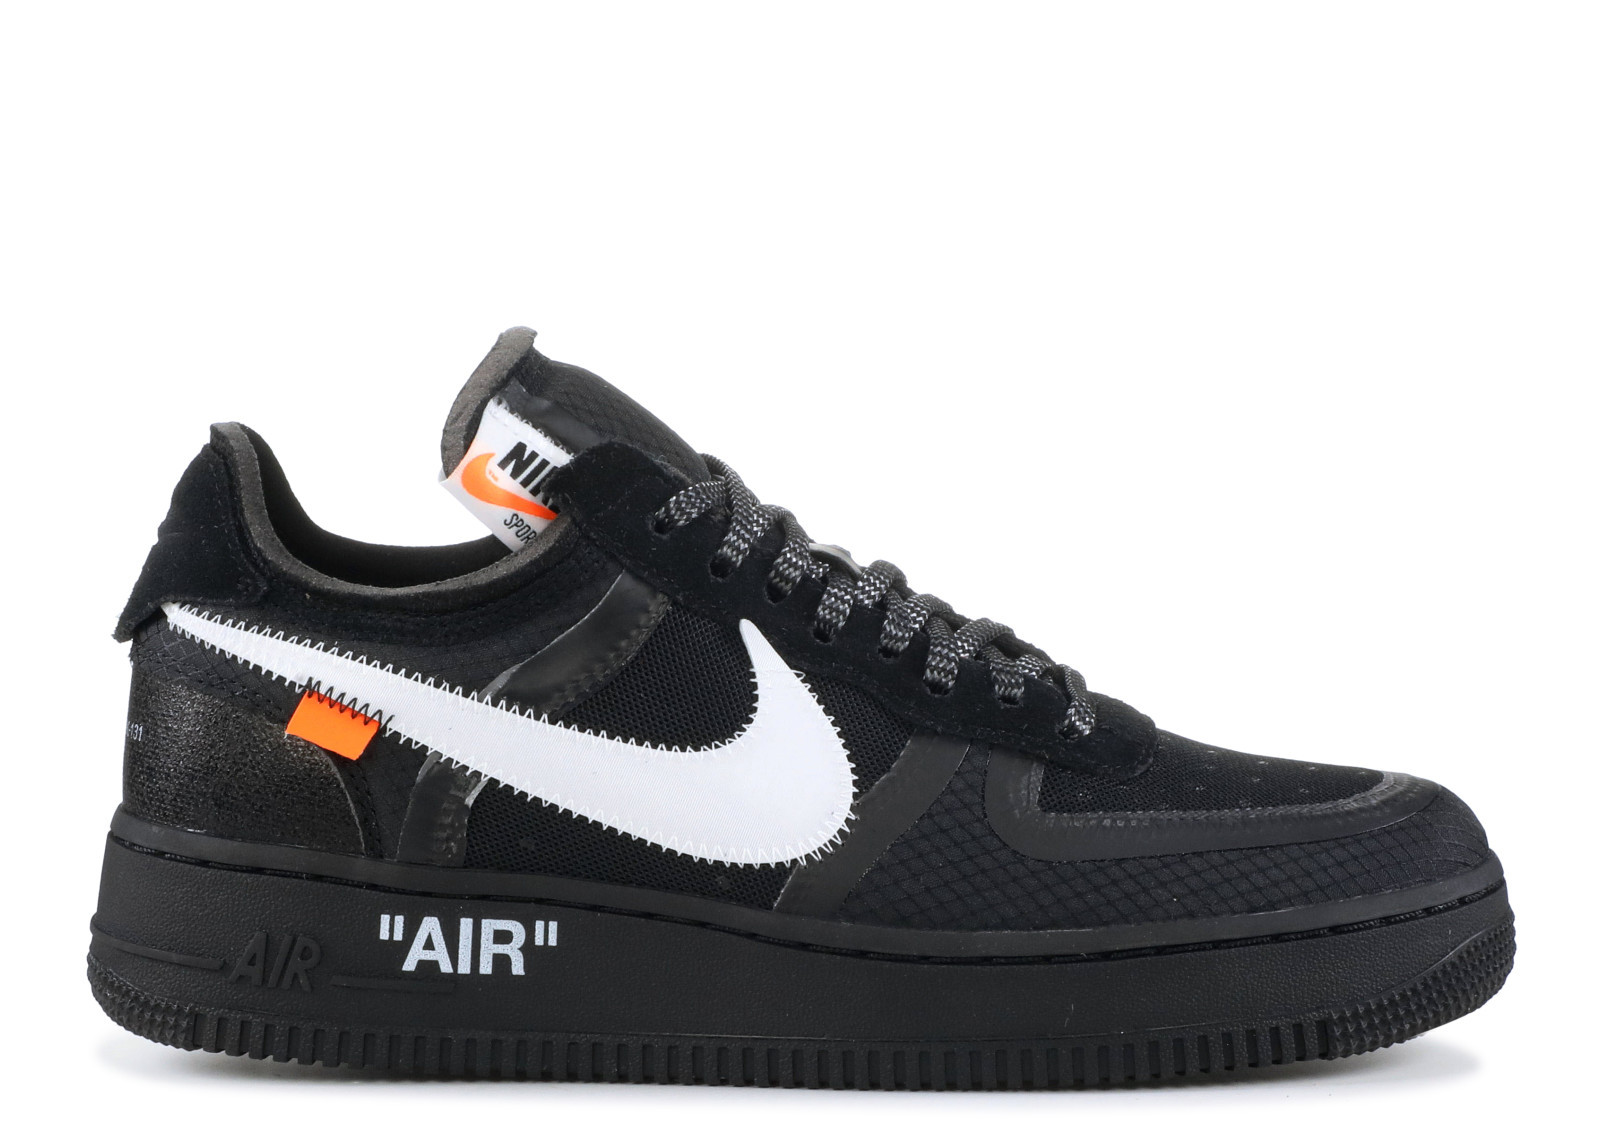 AIR FORCE 1 X OFF WHITE 2.0 BLACK (VNDS) image 1